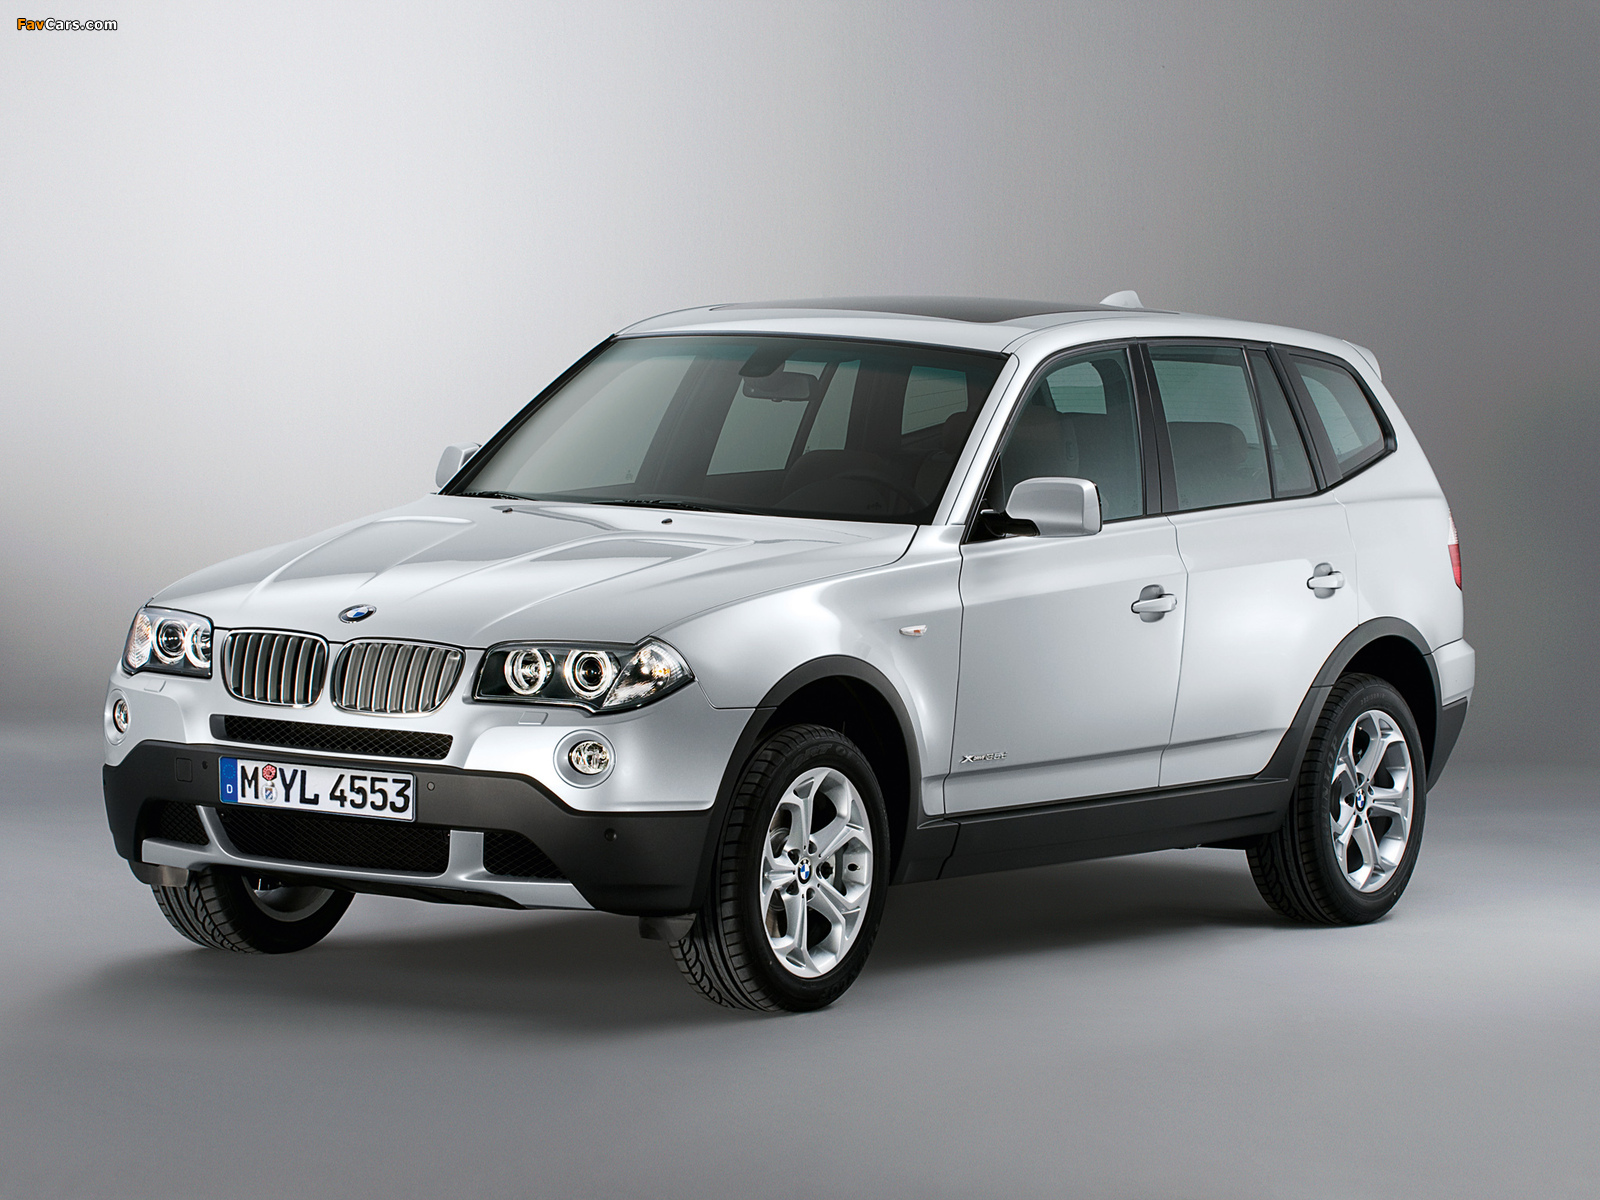 BMW X3 xDrive35d Individual Edition (E83) 2008 wallpapers (1600 x 1200)